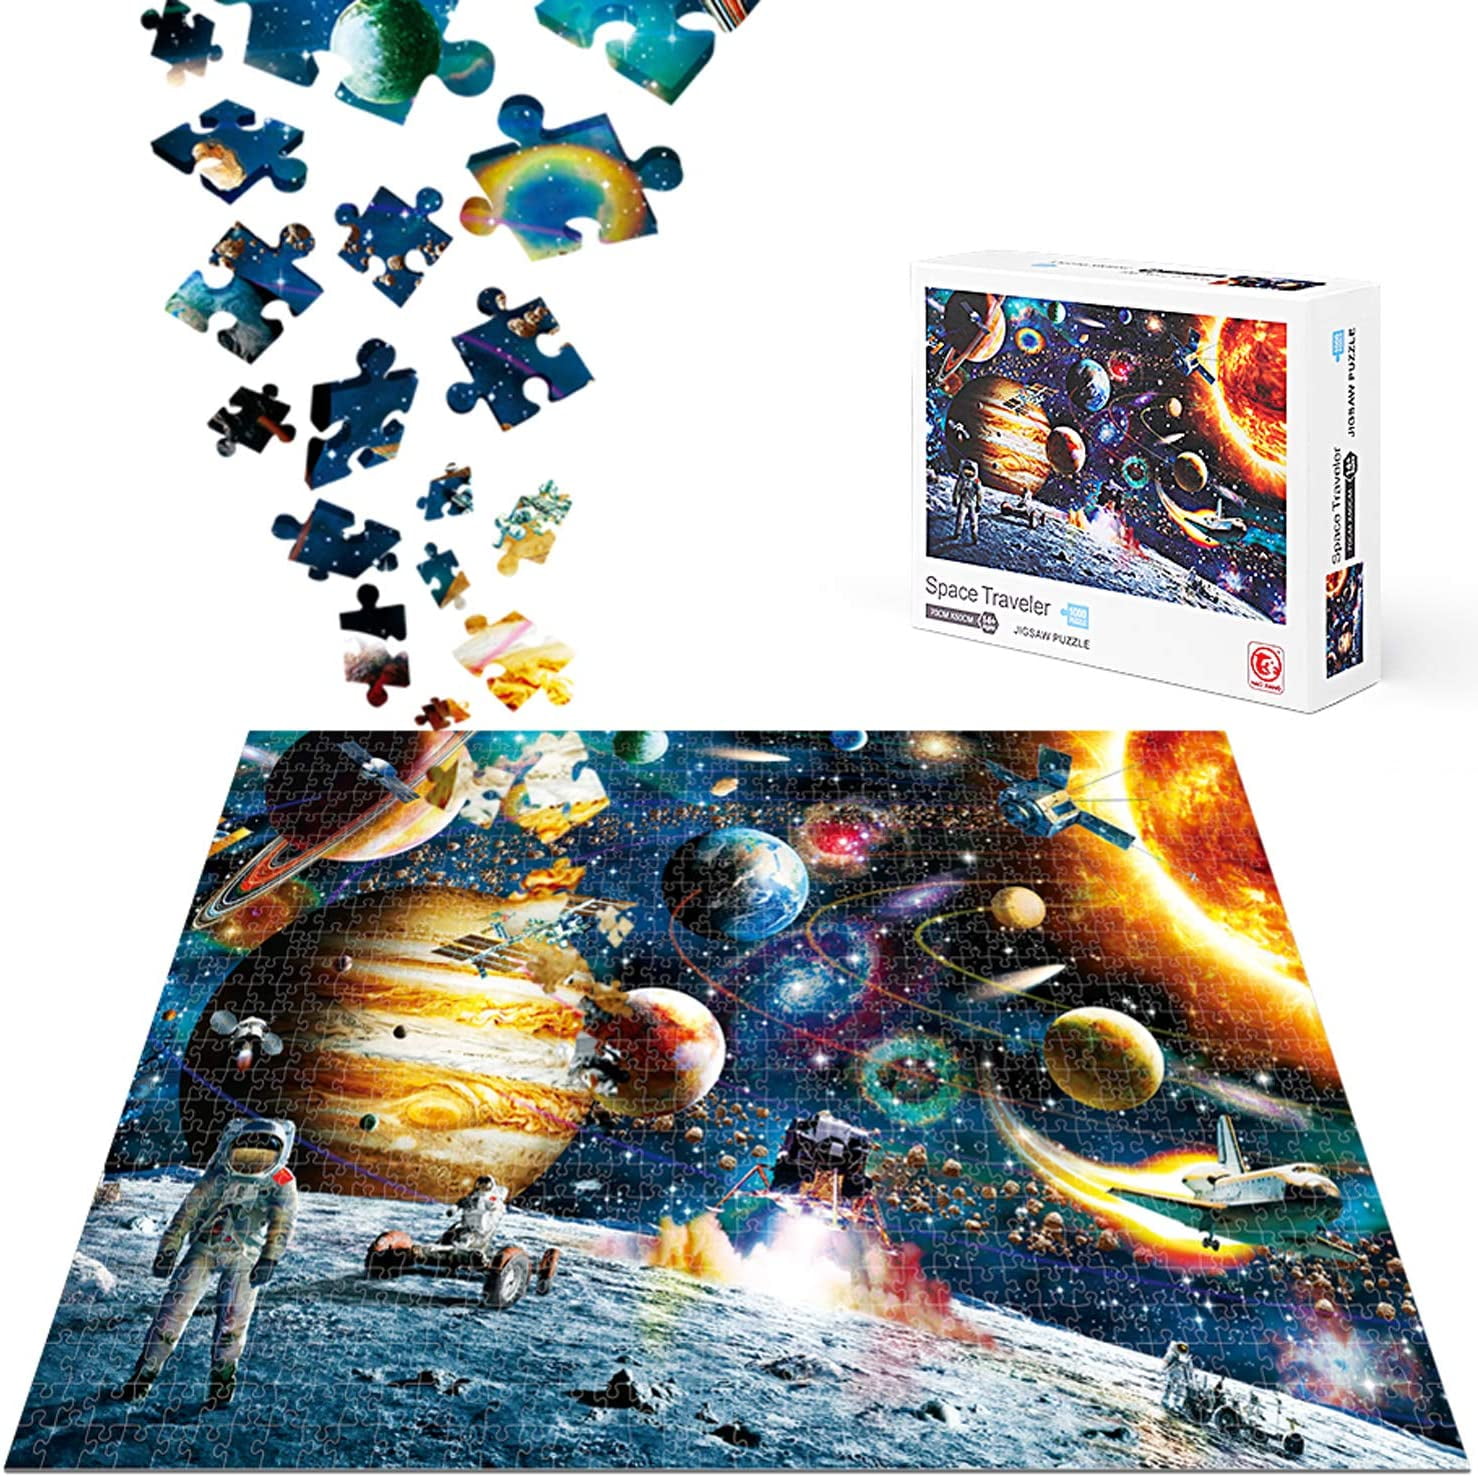 Puzzles for Adults Jigsaw Puzzles 5000 Pieces for Adults Kids Cat Aduts Kids Large Puzzles Games Unique Birthday Present Suitable for Teenagers and Adults 